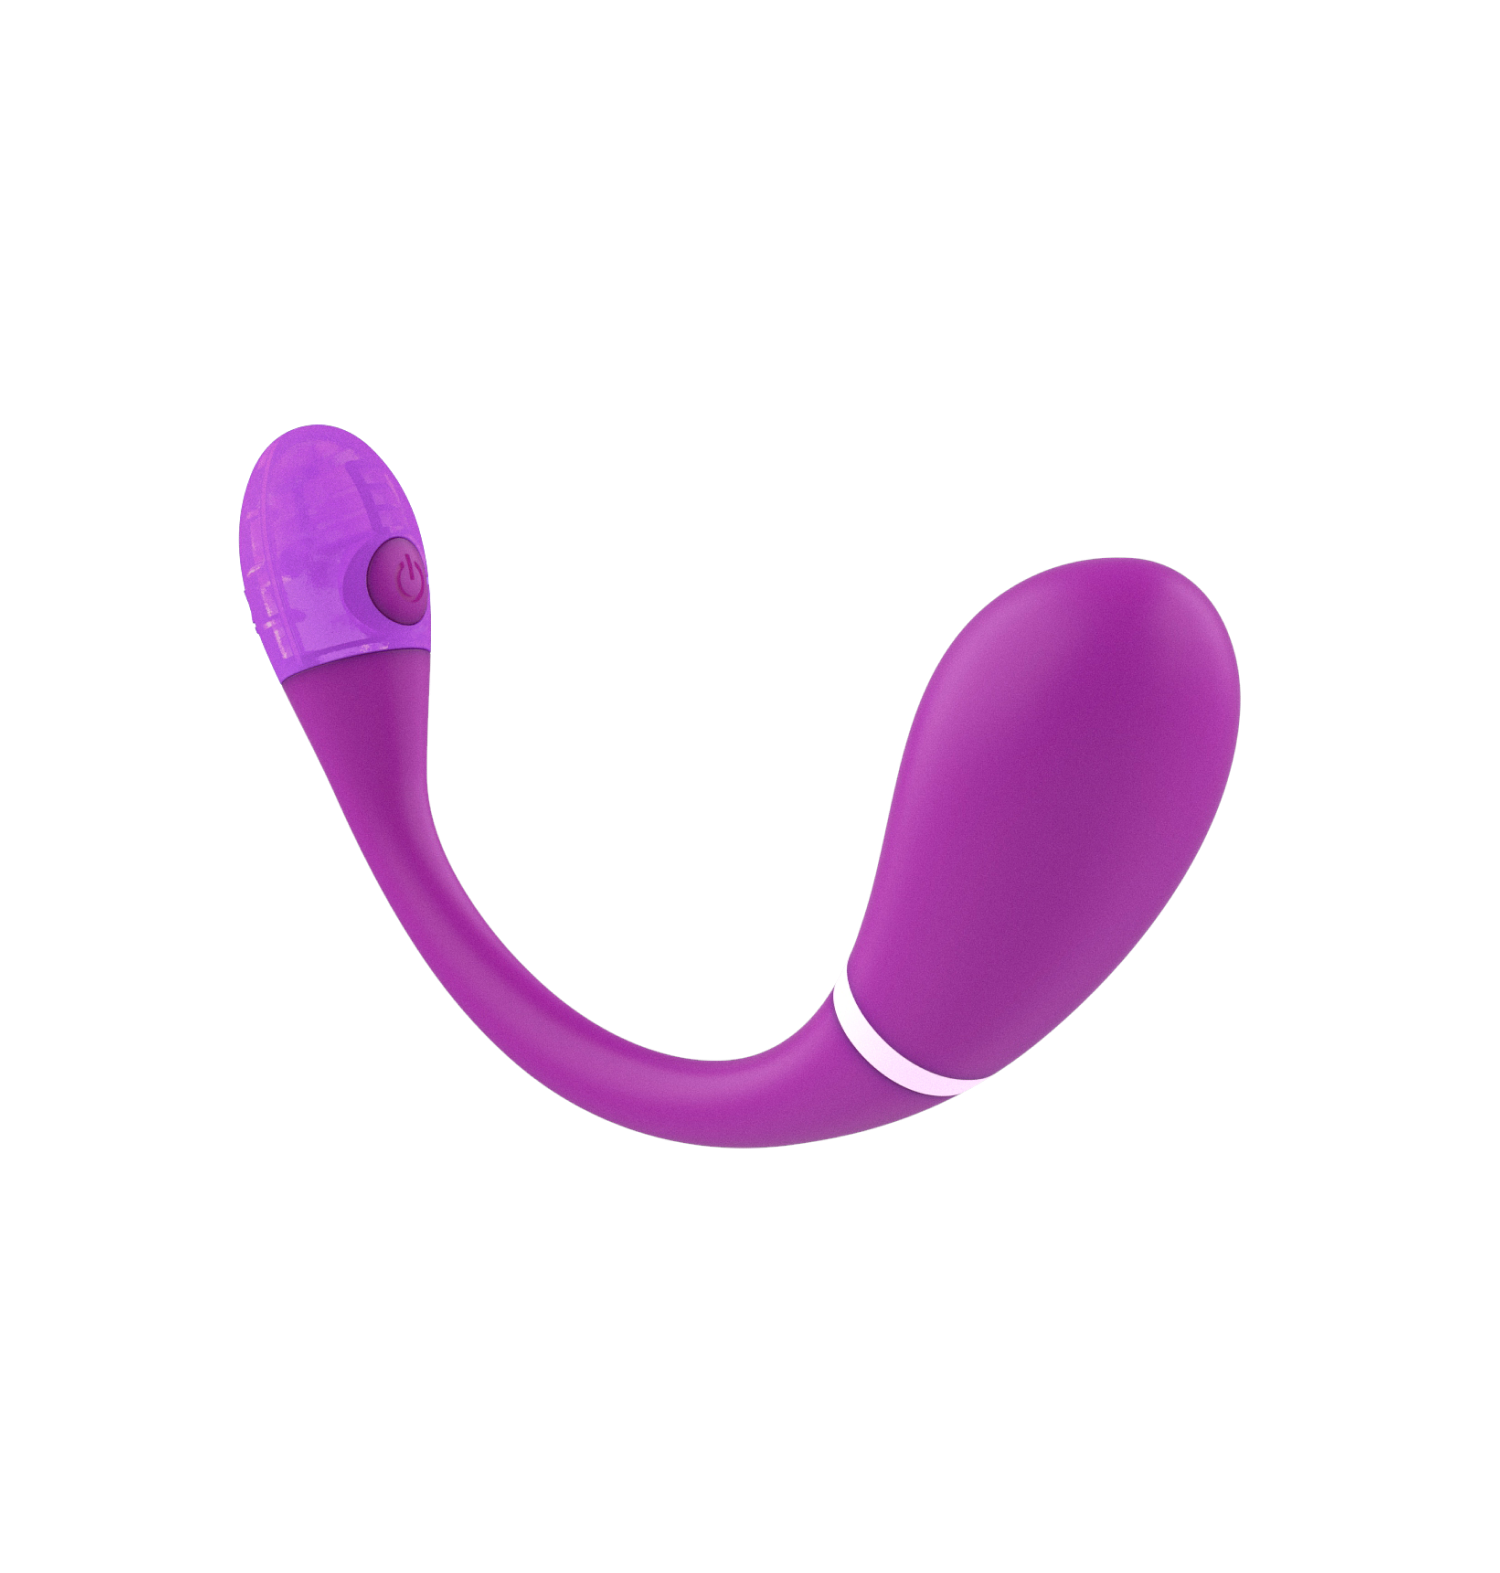 Kiiroo Esca2 blue tooth interactive massager on black background alternate view